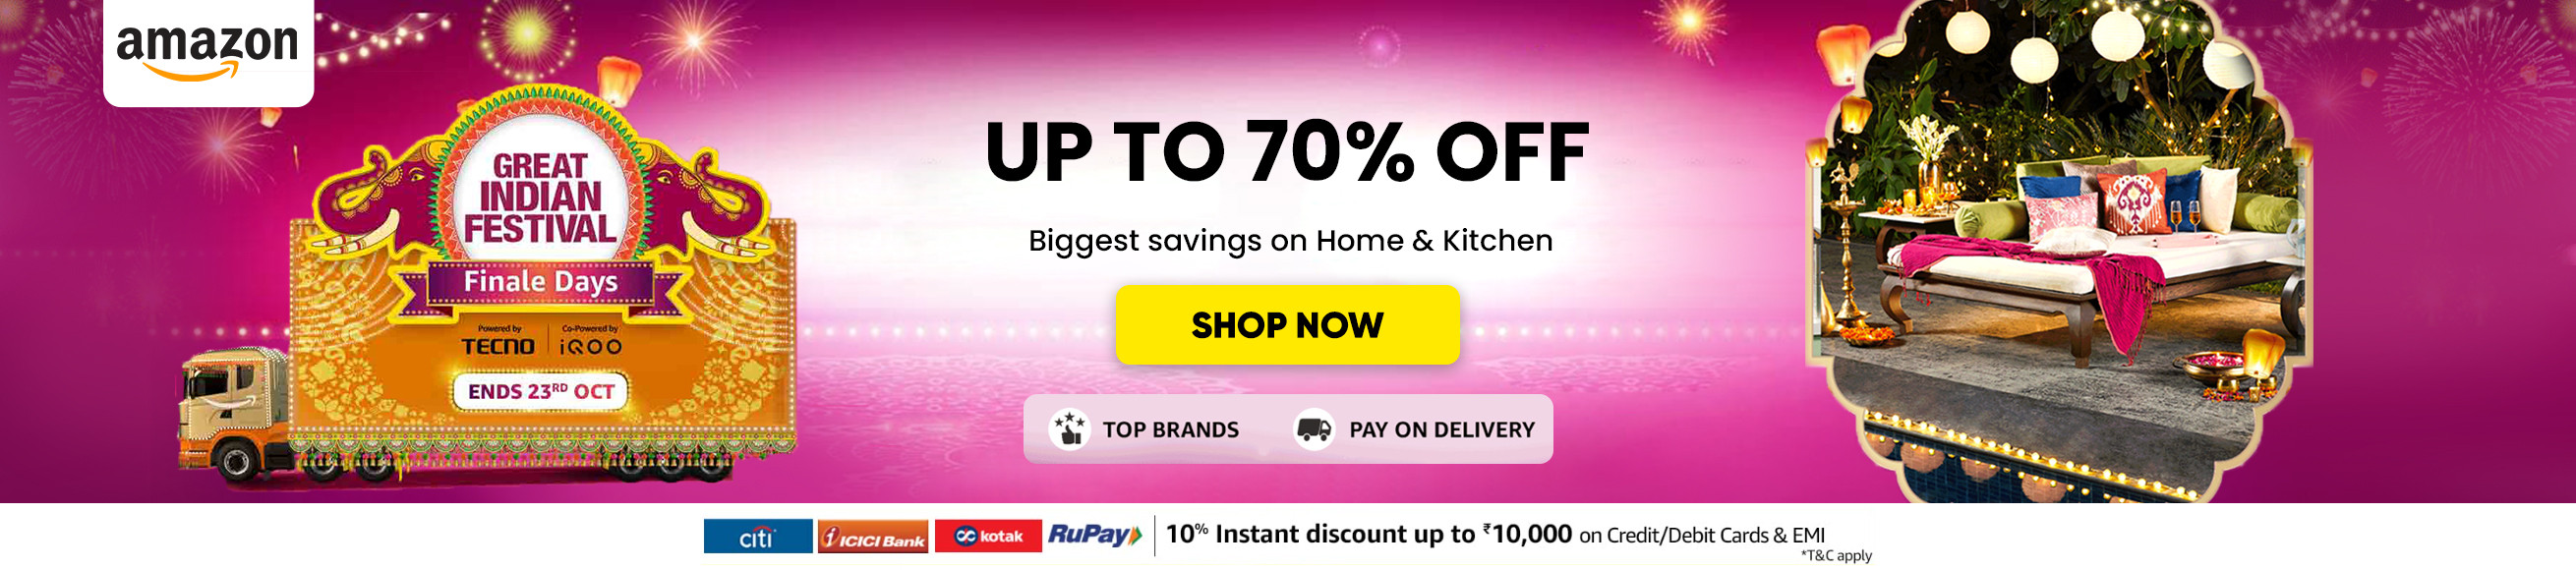 Amazon GREAT INDIAN FESTIVAL Offers on Home Furnishing & Kitchen - (Starts 23rd Sept)